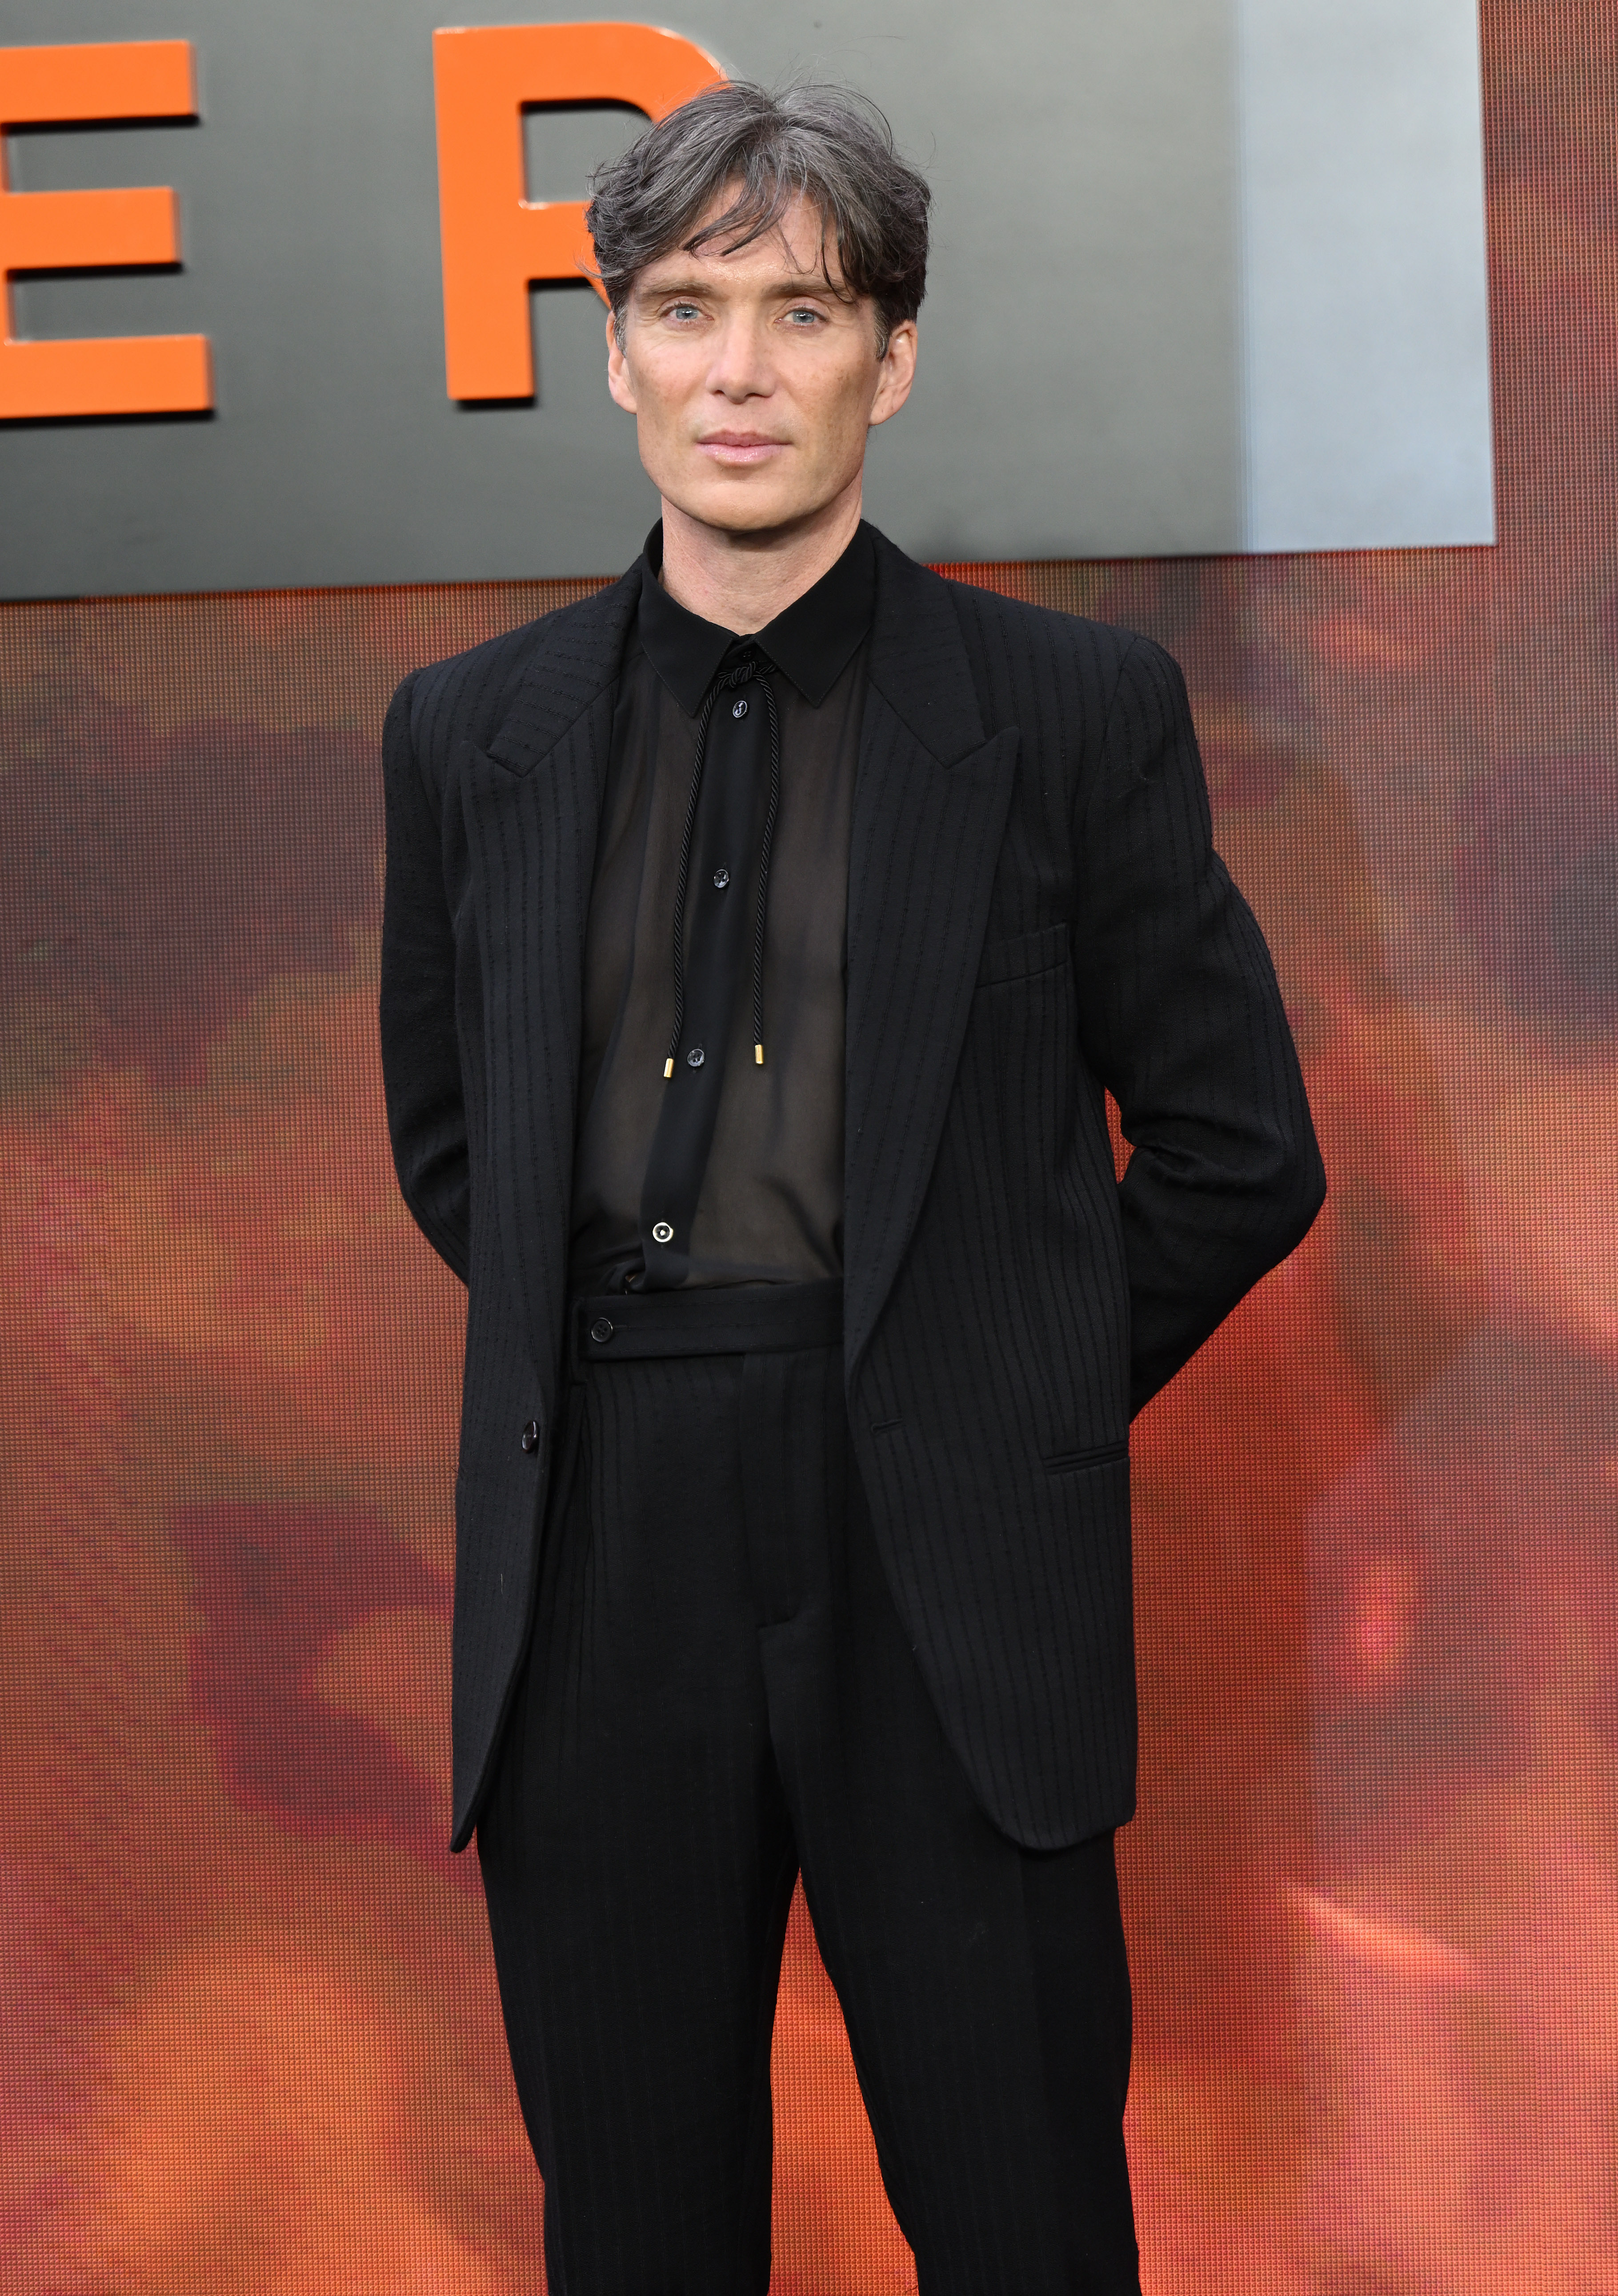 Cillian Murphy attends the "Oppenheimer" UK Premiere at Odeon Luxe Leicester Square in London, England, on July 13, 2023. | Source: Getty Images